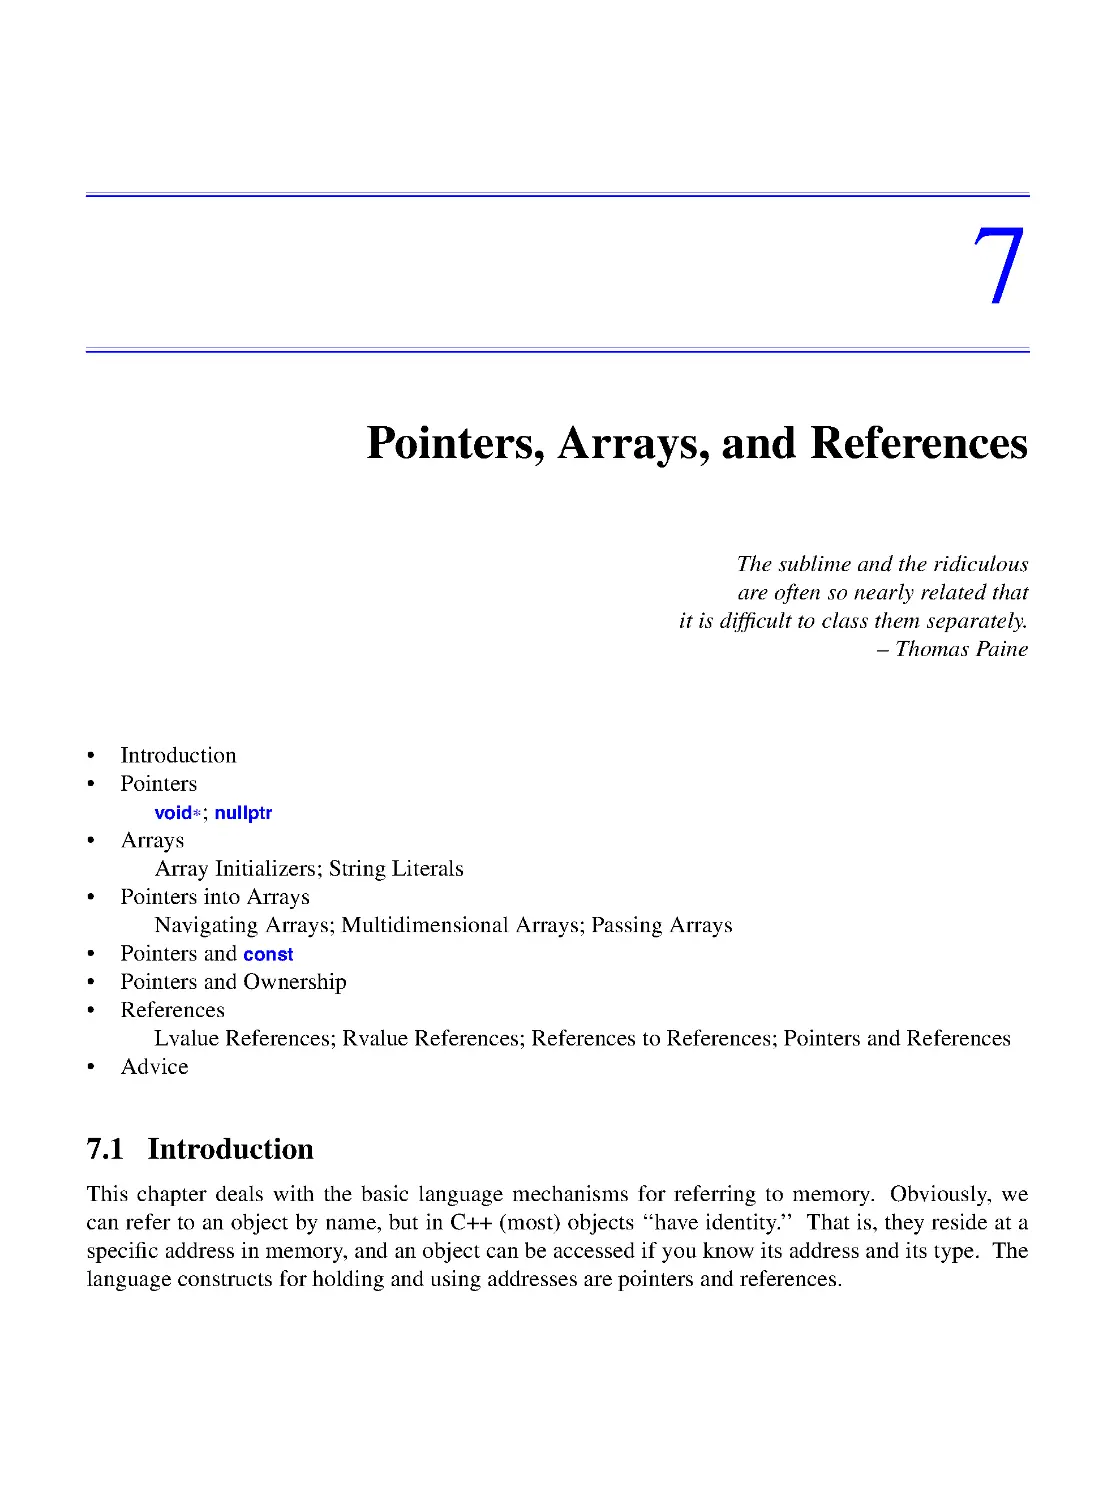 7. Pointers, Arrays, and References